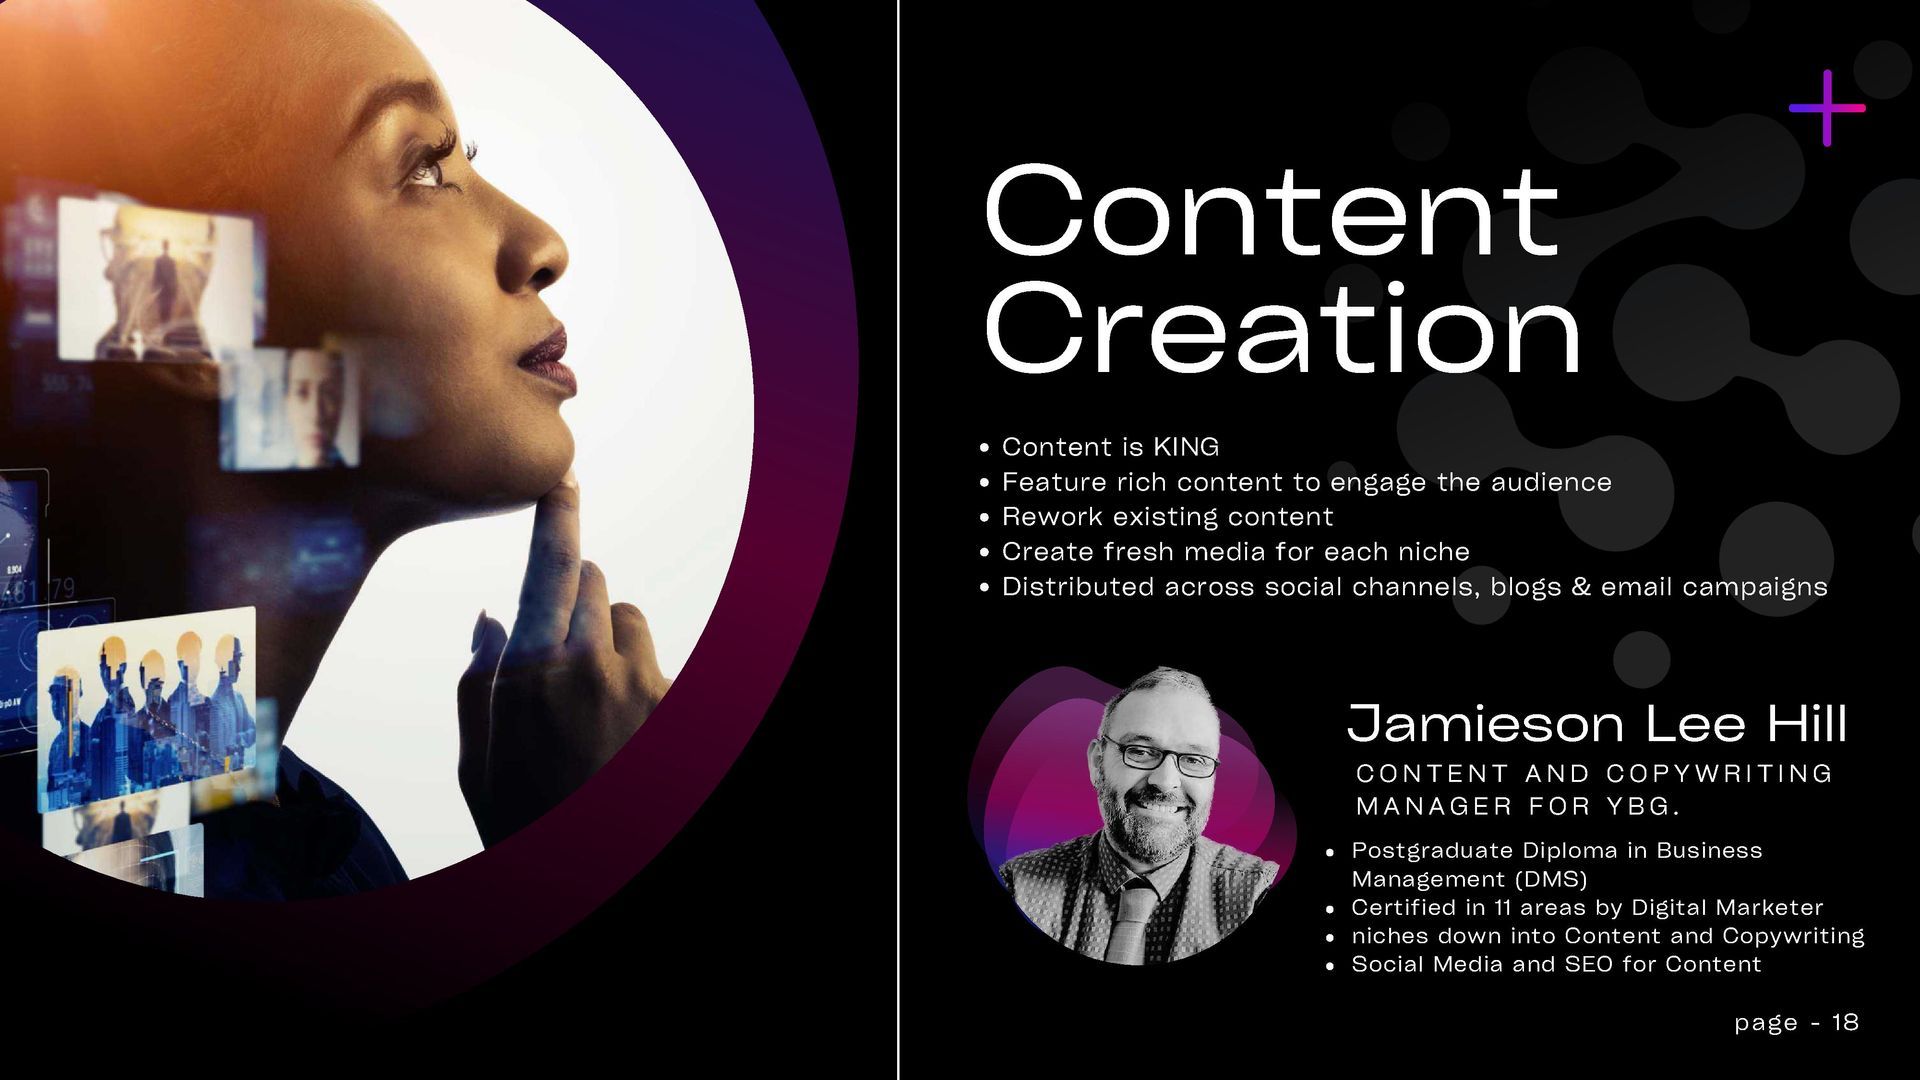 A poster for content creation with a woman and a man